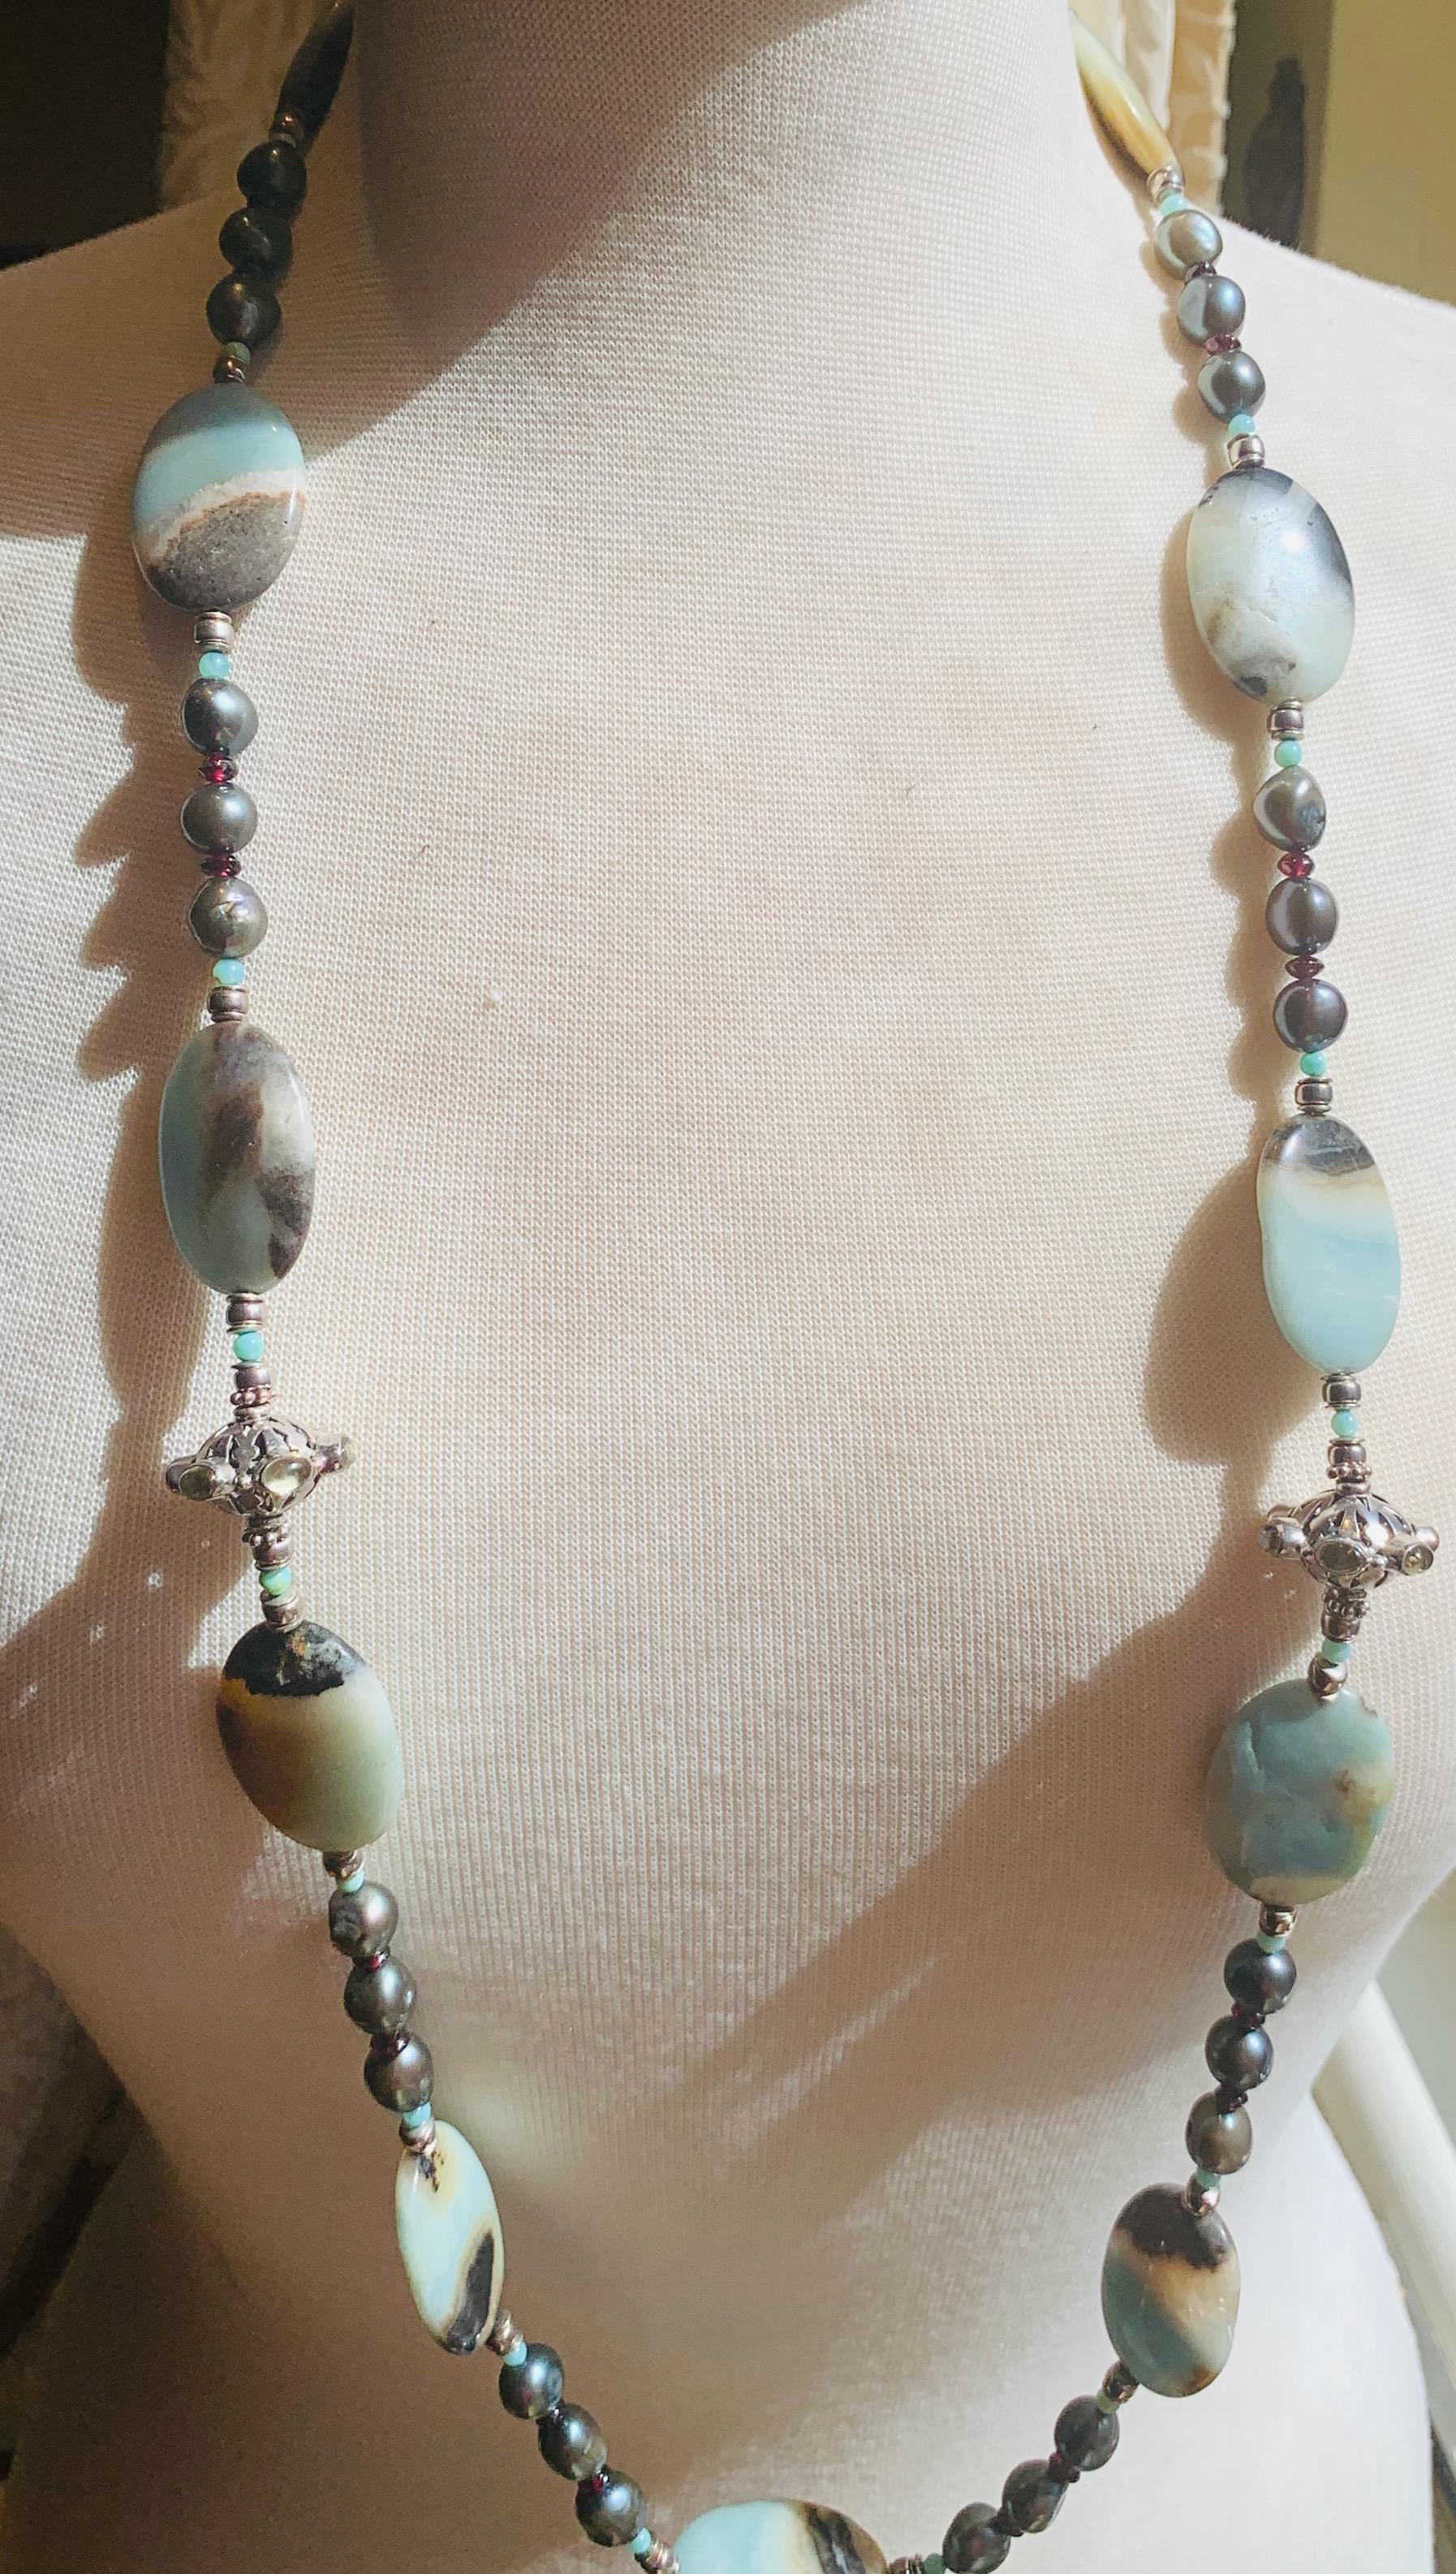 One of Kind handmade 40 inch long Fine Gemstone Amazonite, and Garnet rondelles, and  Natural Peruvian Opal and  Baroque Lustrous Freshwater Tahitian Pearls with 2 Sterling Focal beads with Natural Citrine, and Sterling rondelles with Sterling